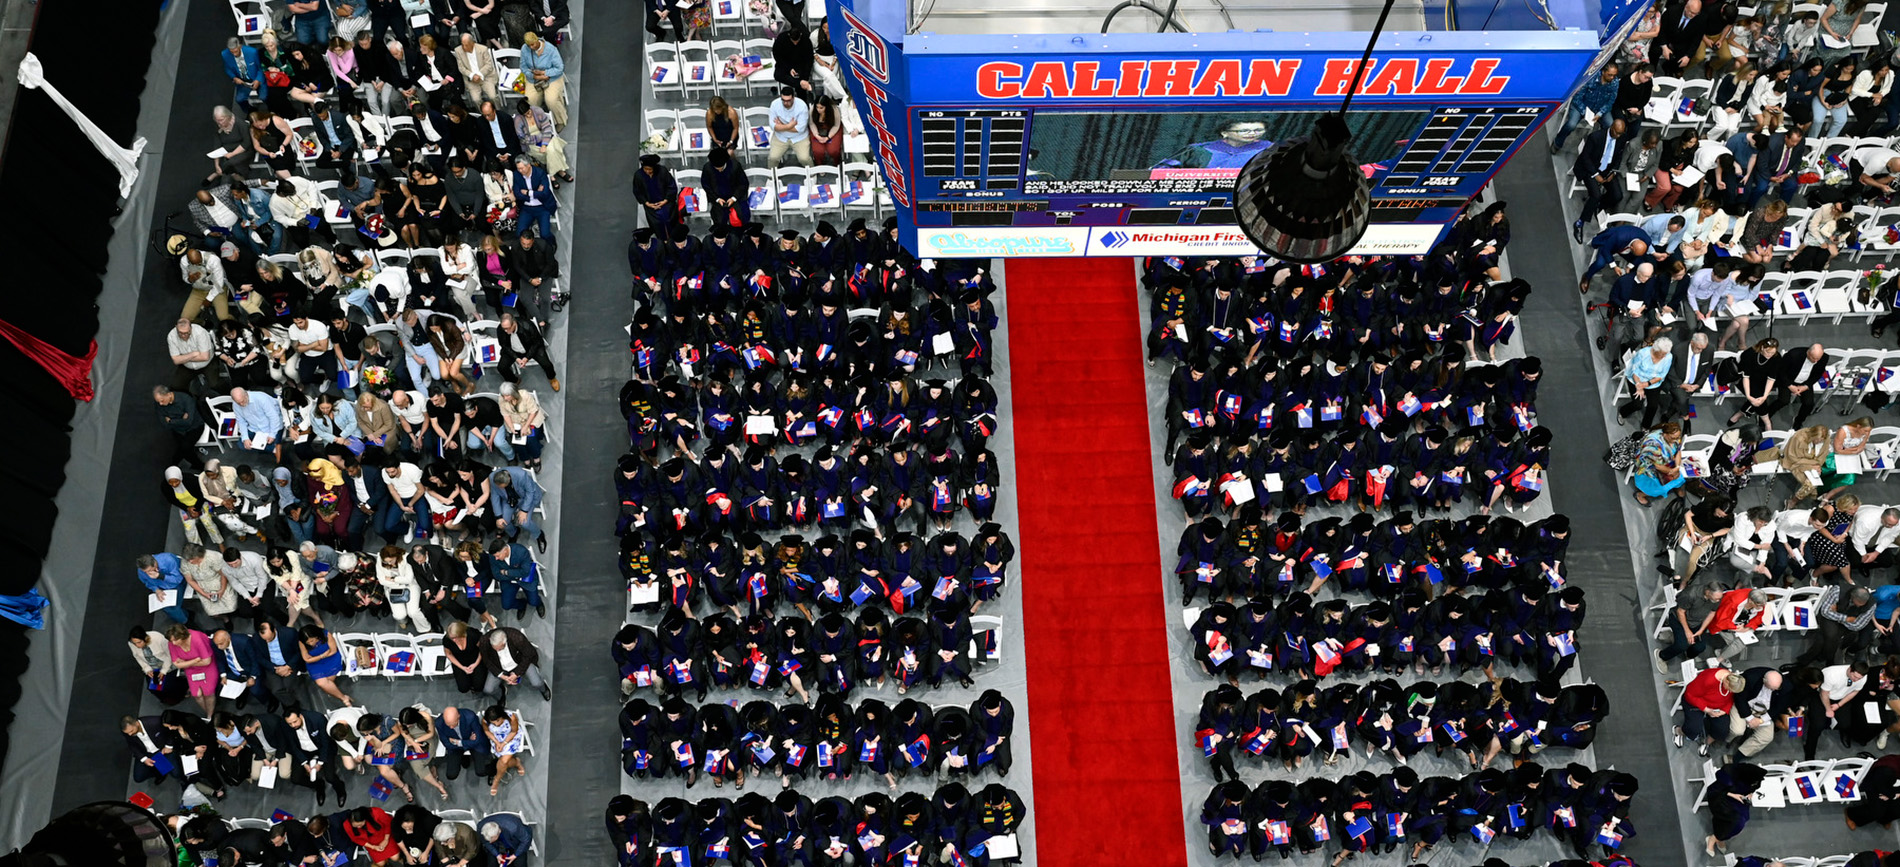 An overhead view of graduates and families seated in rows during commencement.